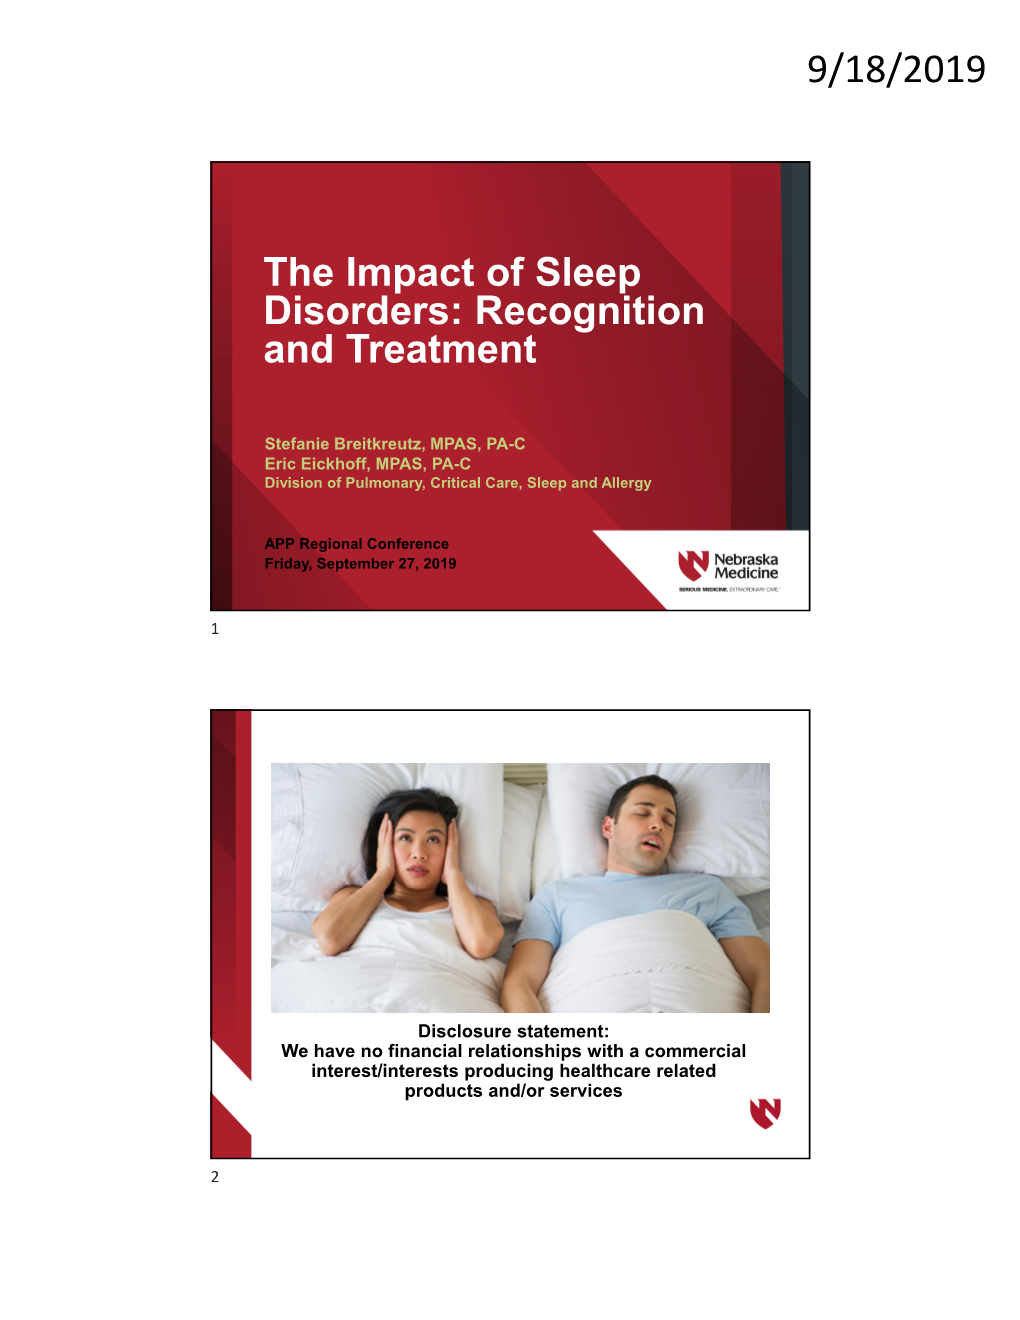 The Impact of Sleep Disorders: Recognition and Treatment